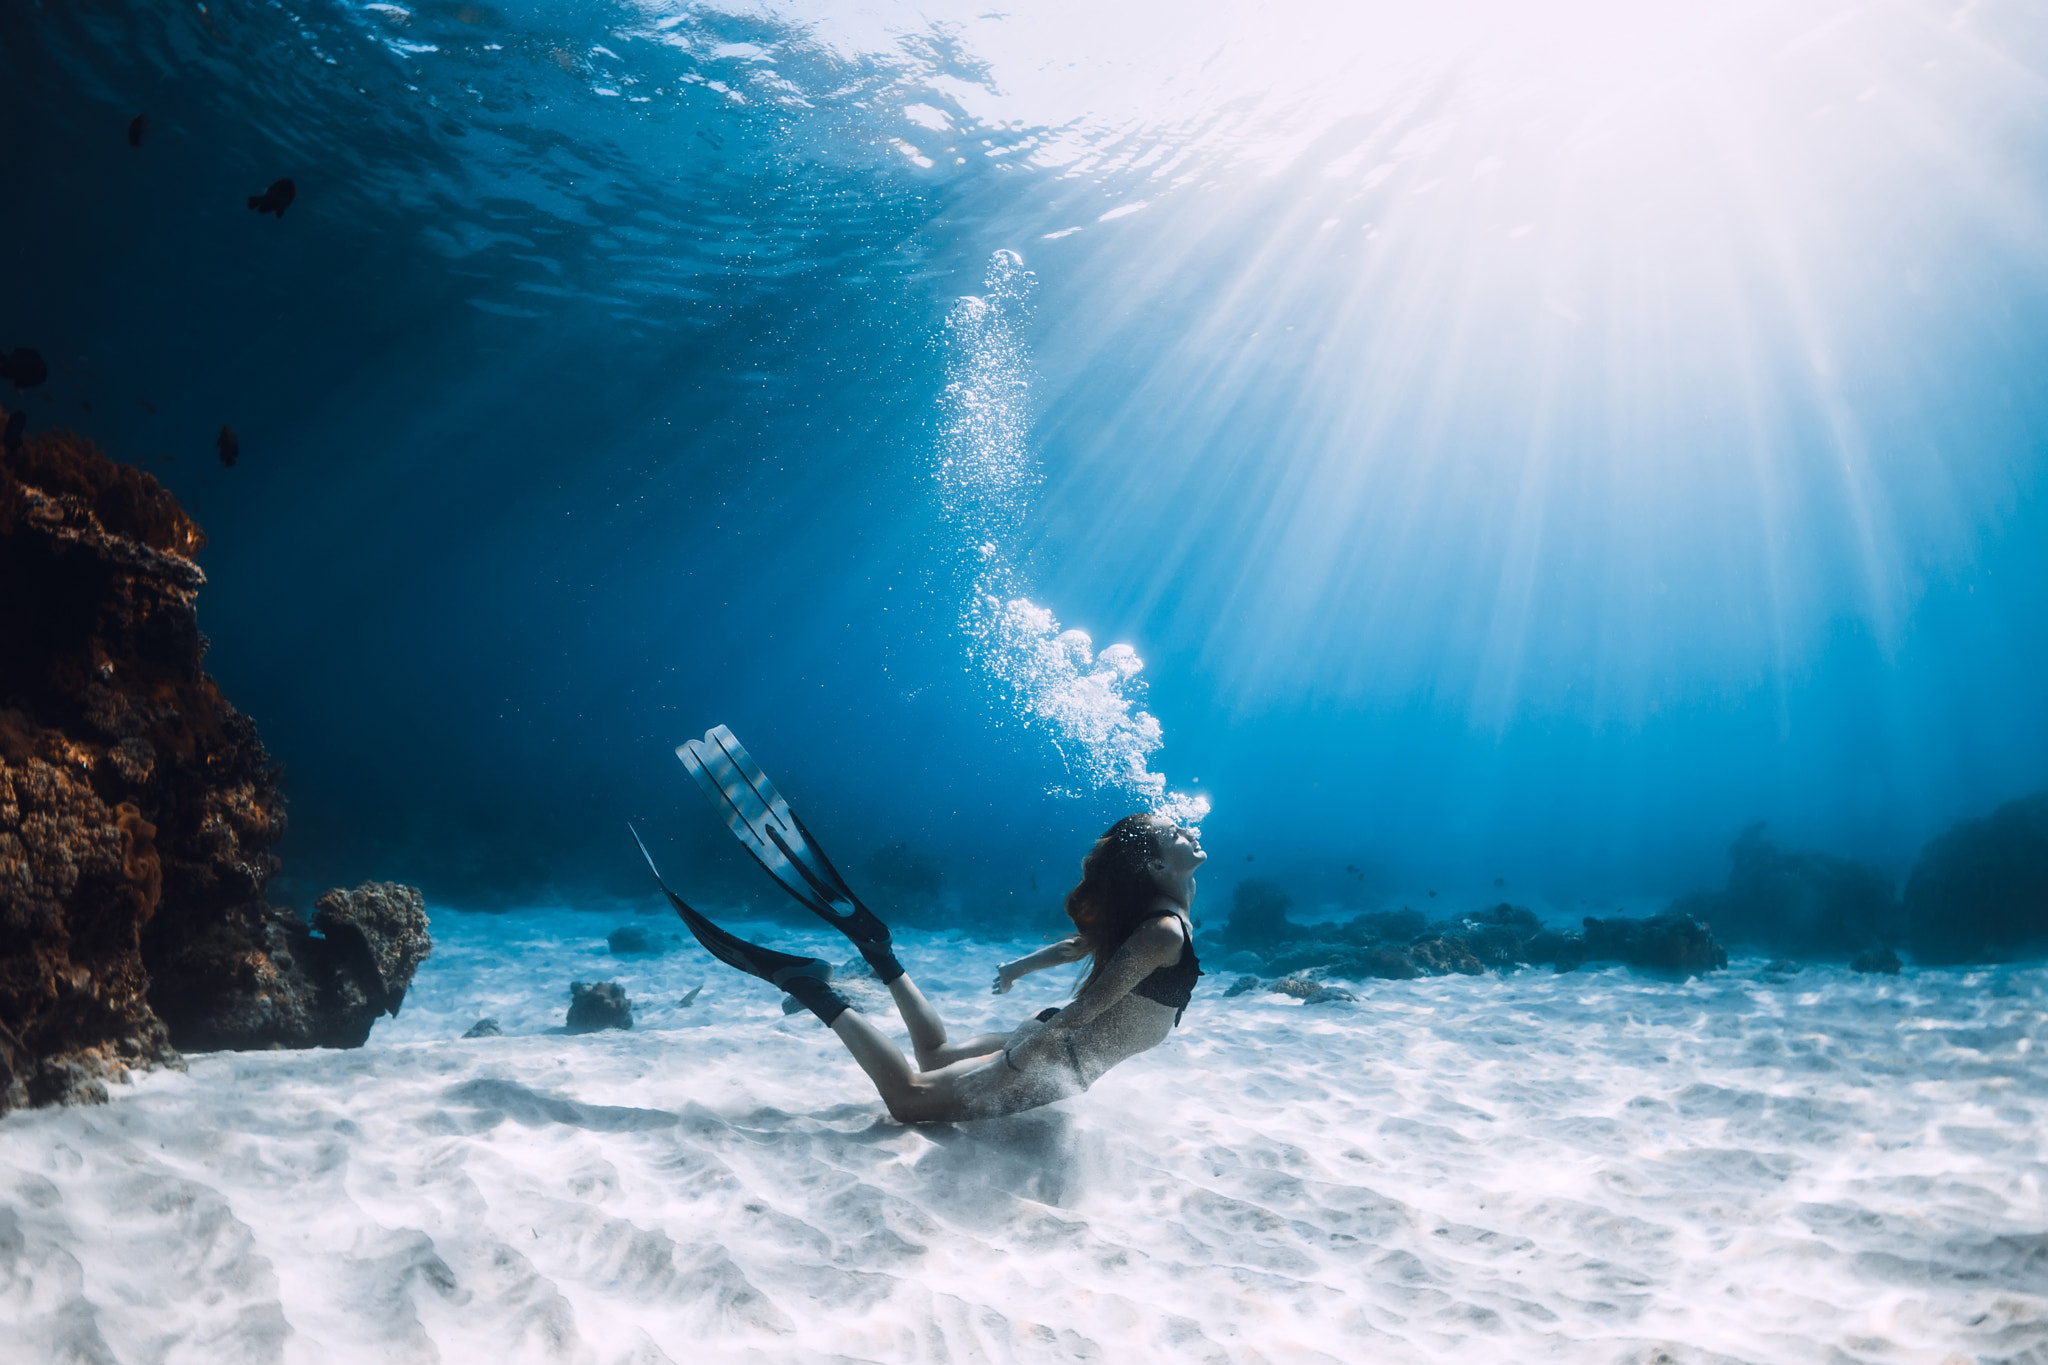 Diving: A female freediver at the sandy sea bottom, Extreme water sport. 2050x1370 HD Wallpaper.